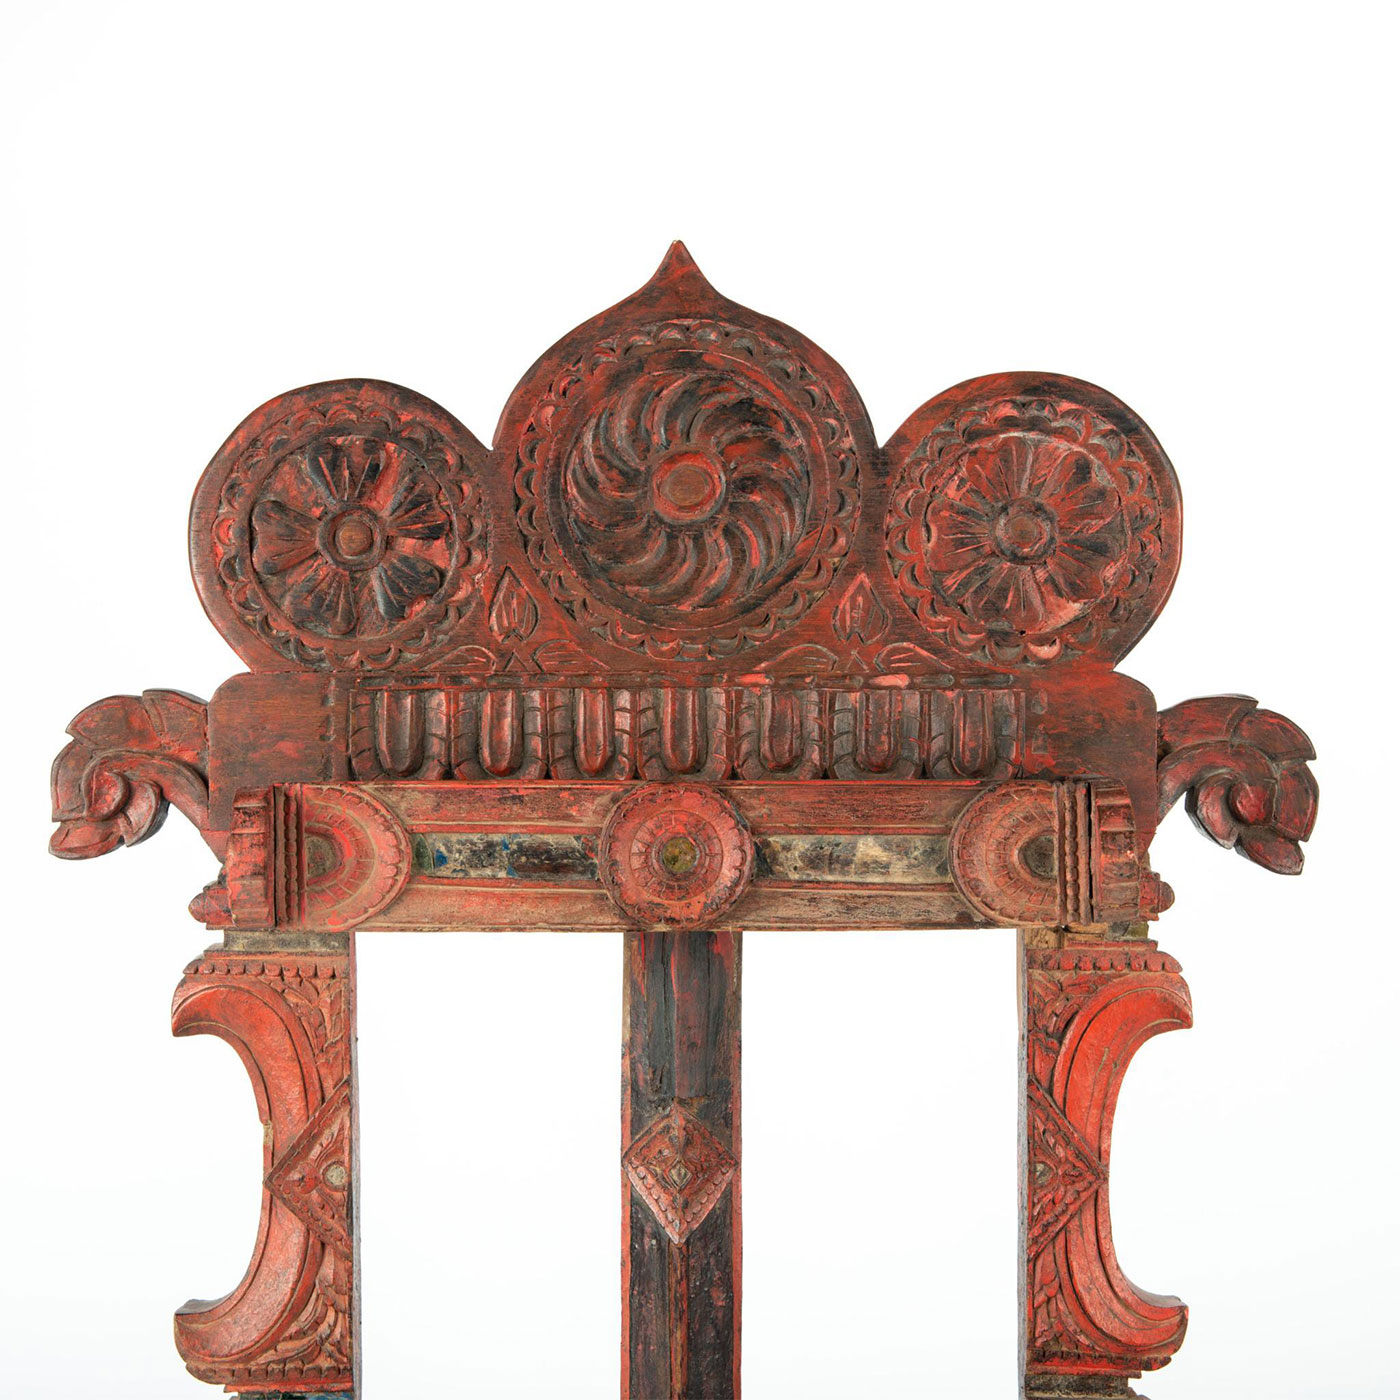 18TH CENTURY THAI WOODEN ARCHITECTURAL DECOR - Image 2 of 7